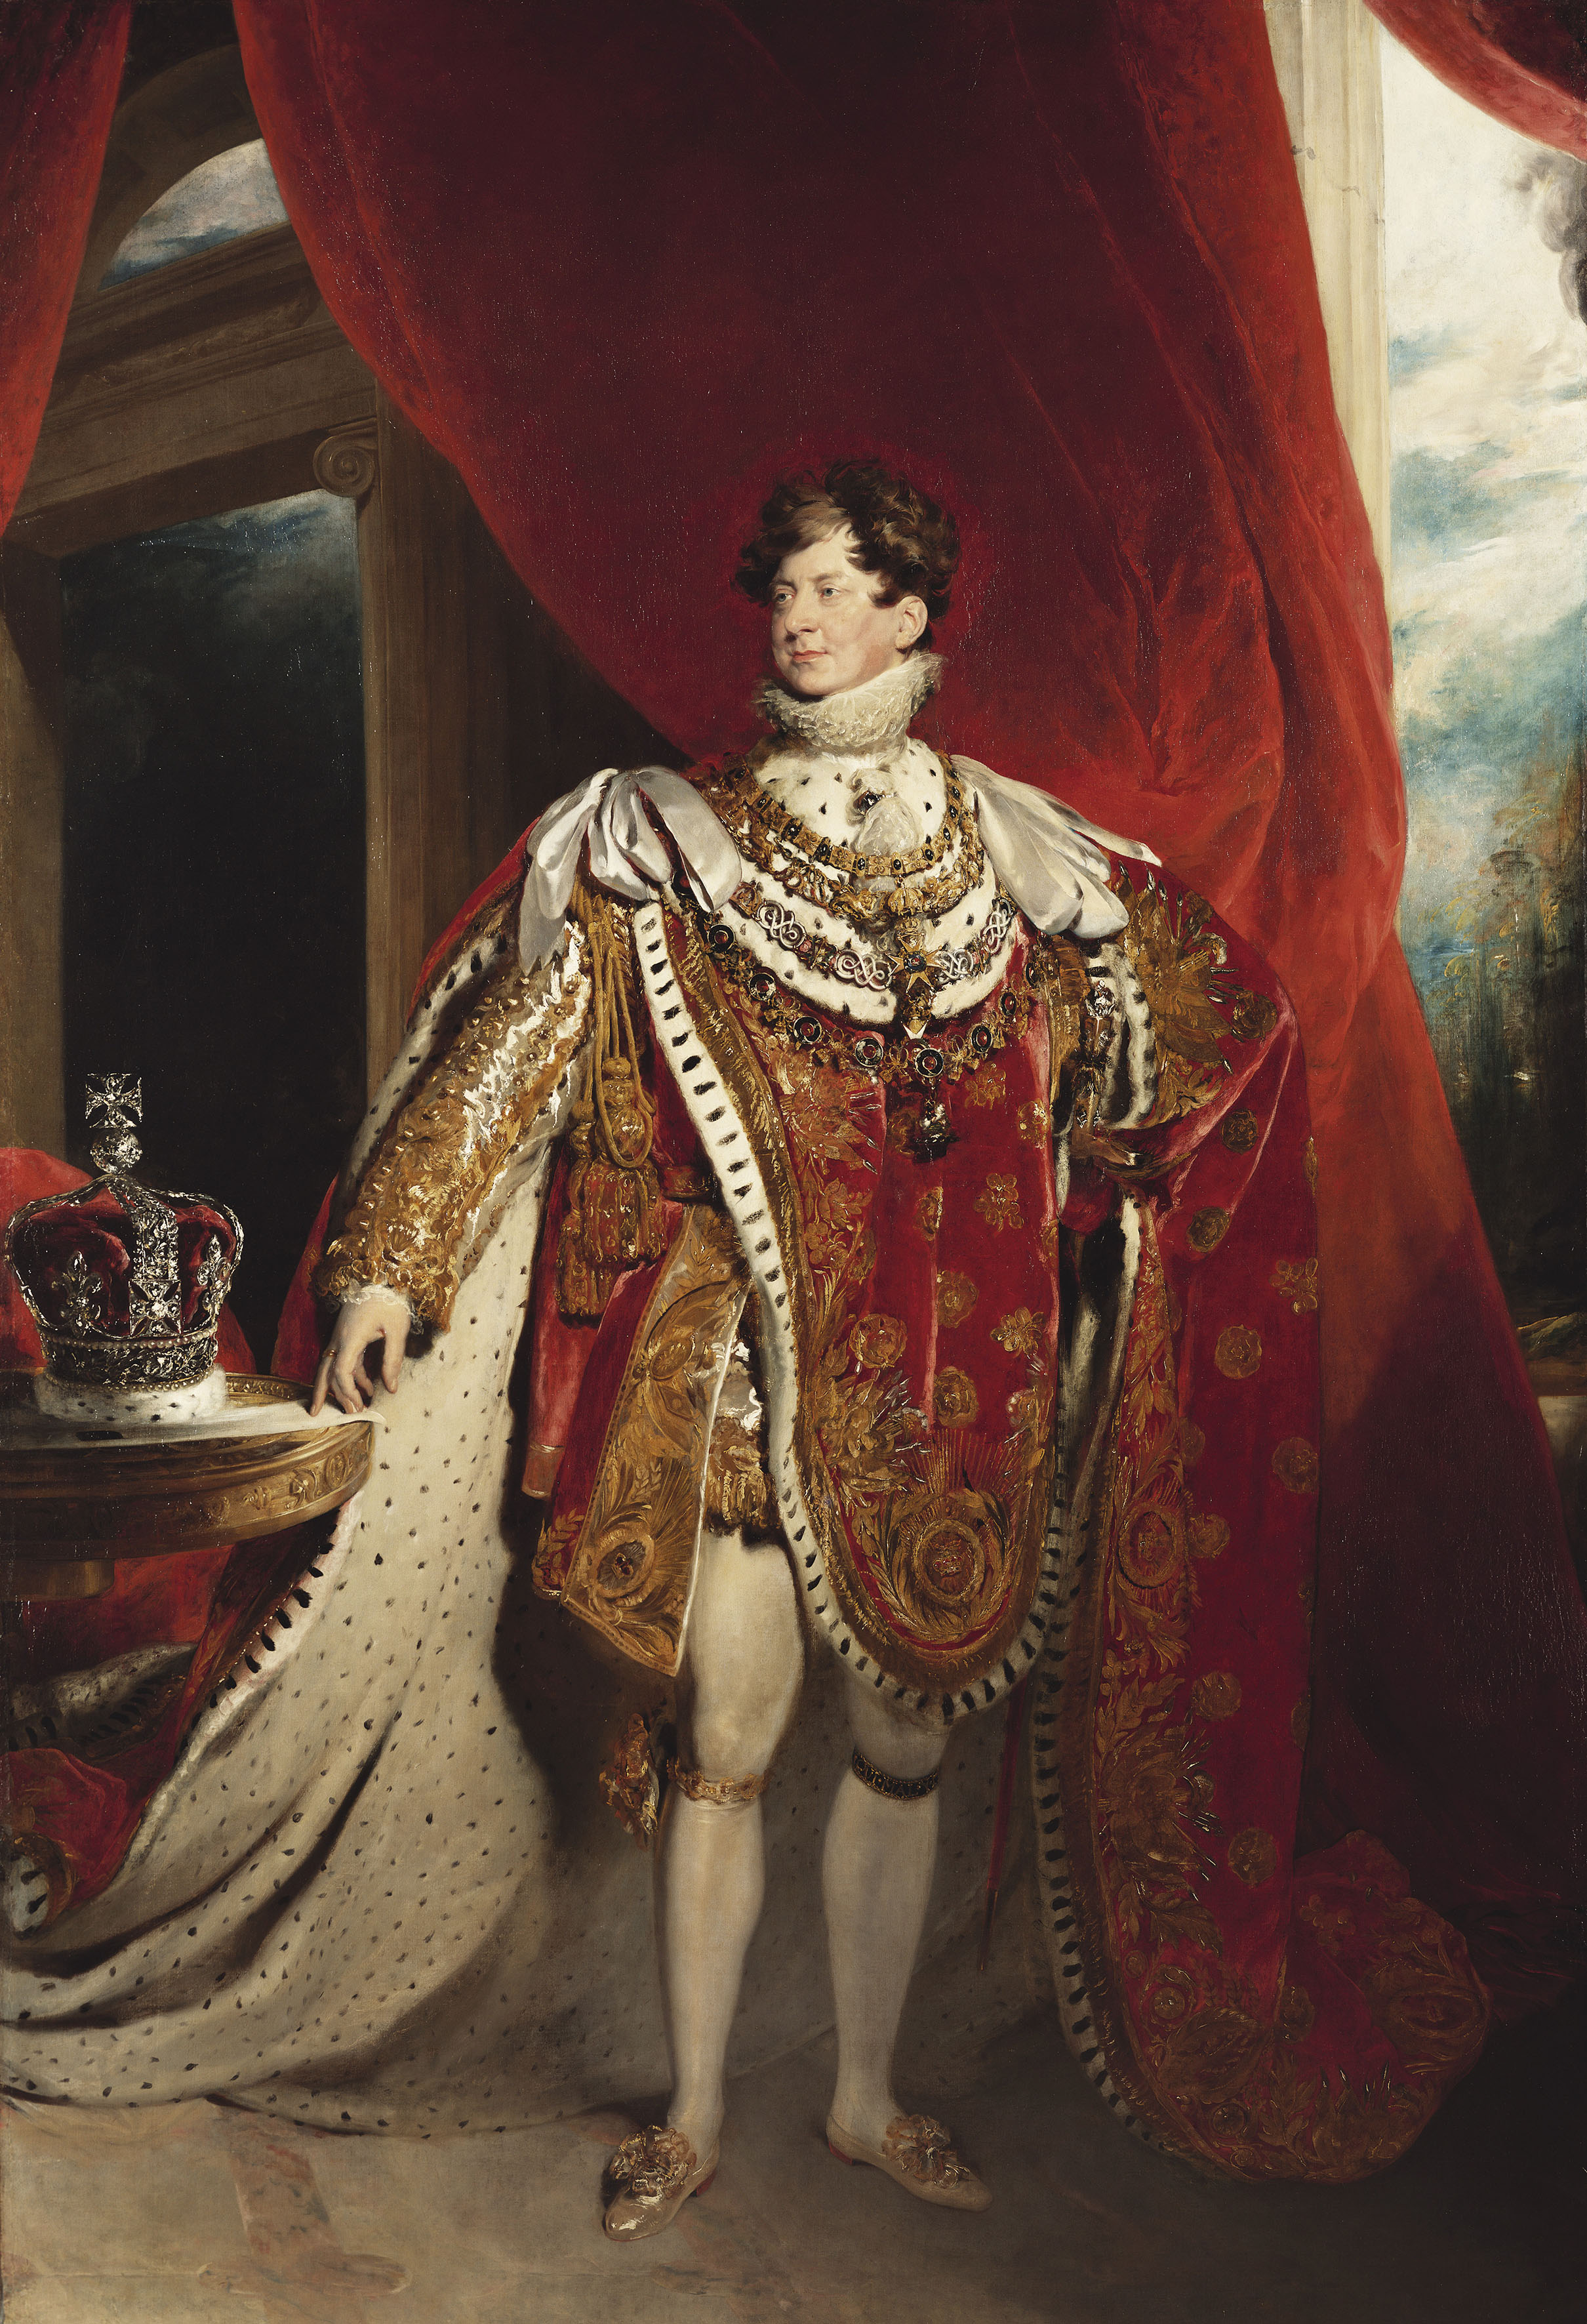 Sir Thomas Lawrence, George IV (1762-1830), 1821  Credit: Royal Collection Trust / (c) Her Majesty Queen Elizabeth II 2019 